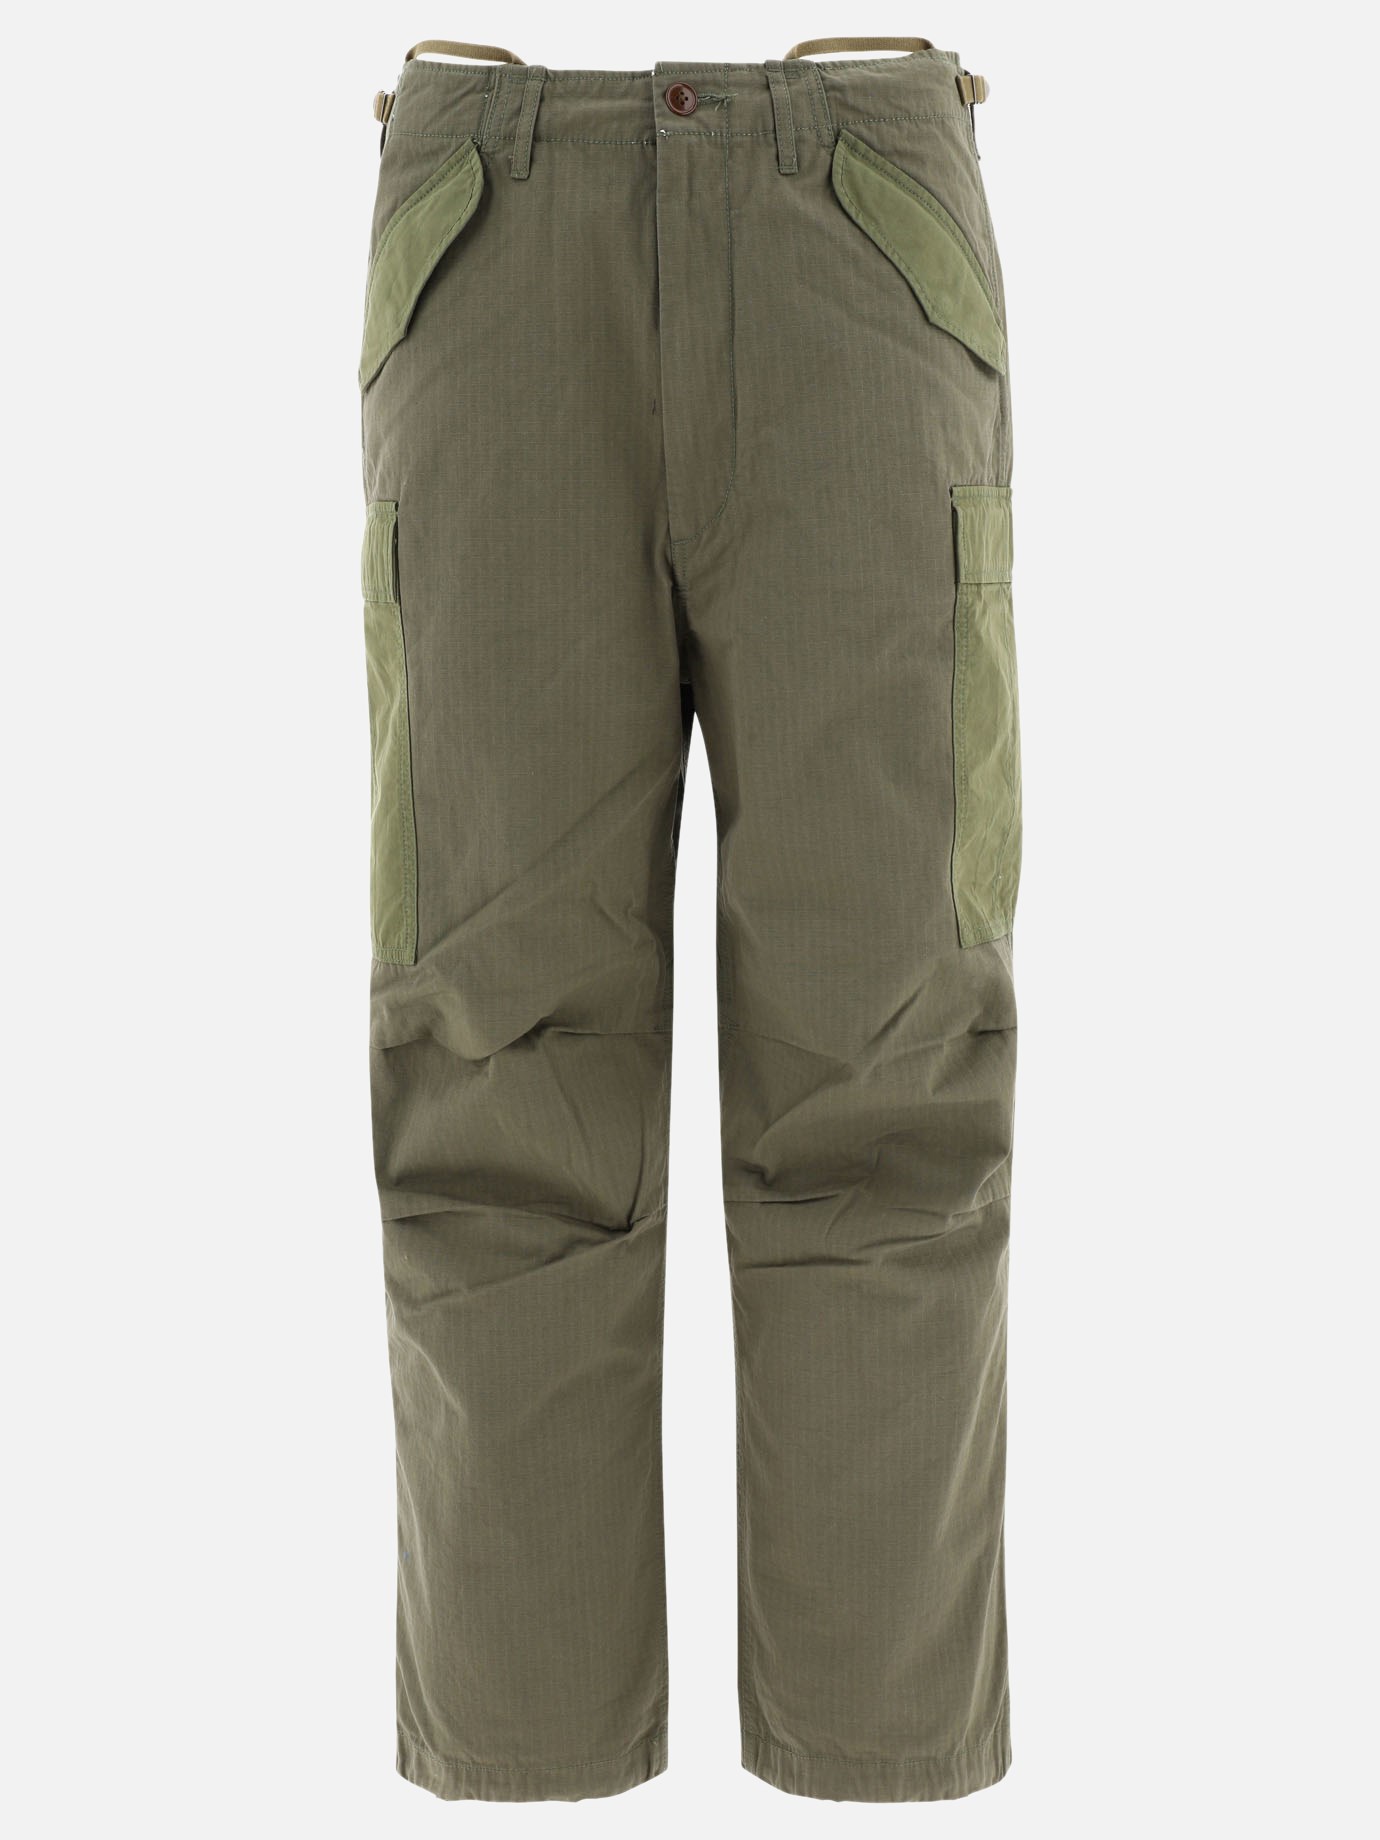 Cargo trousers with drawstring